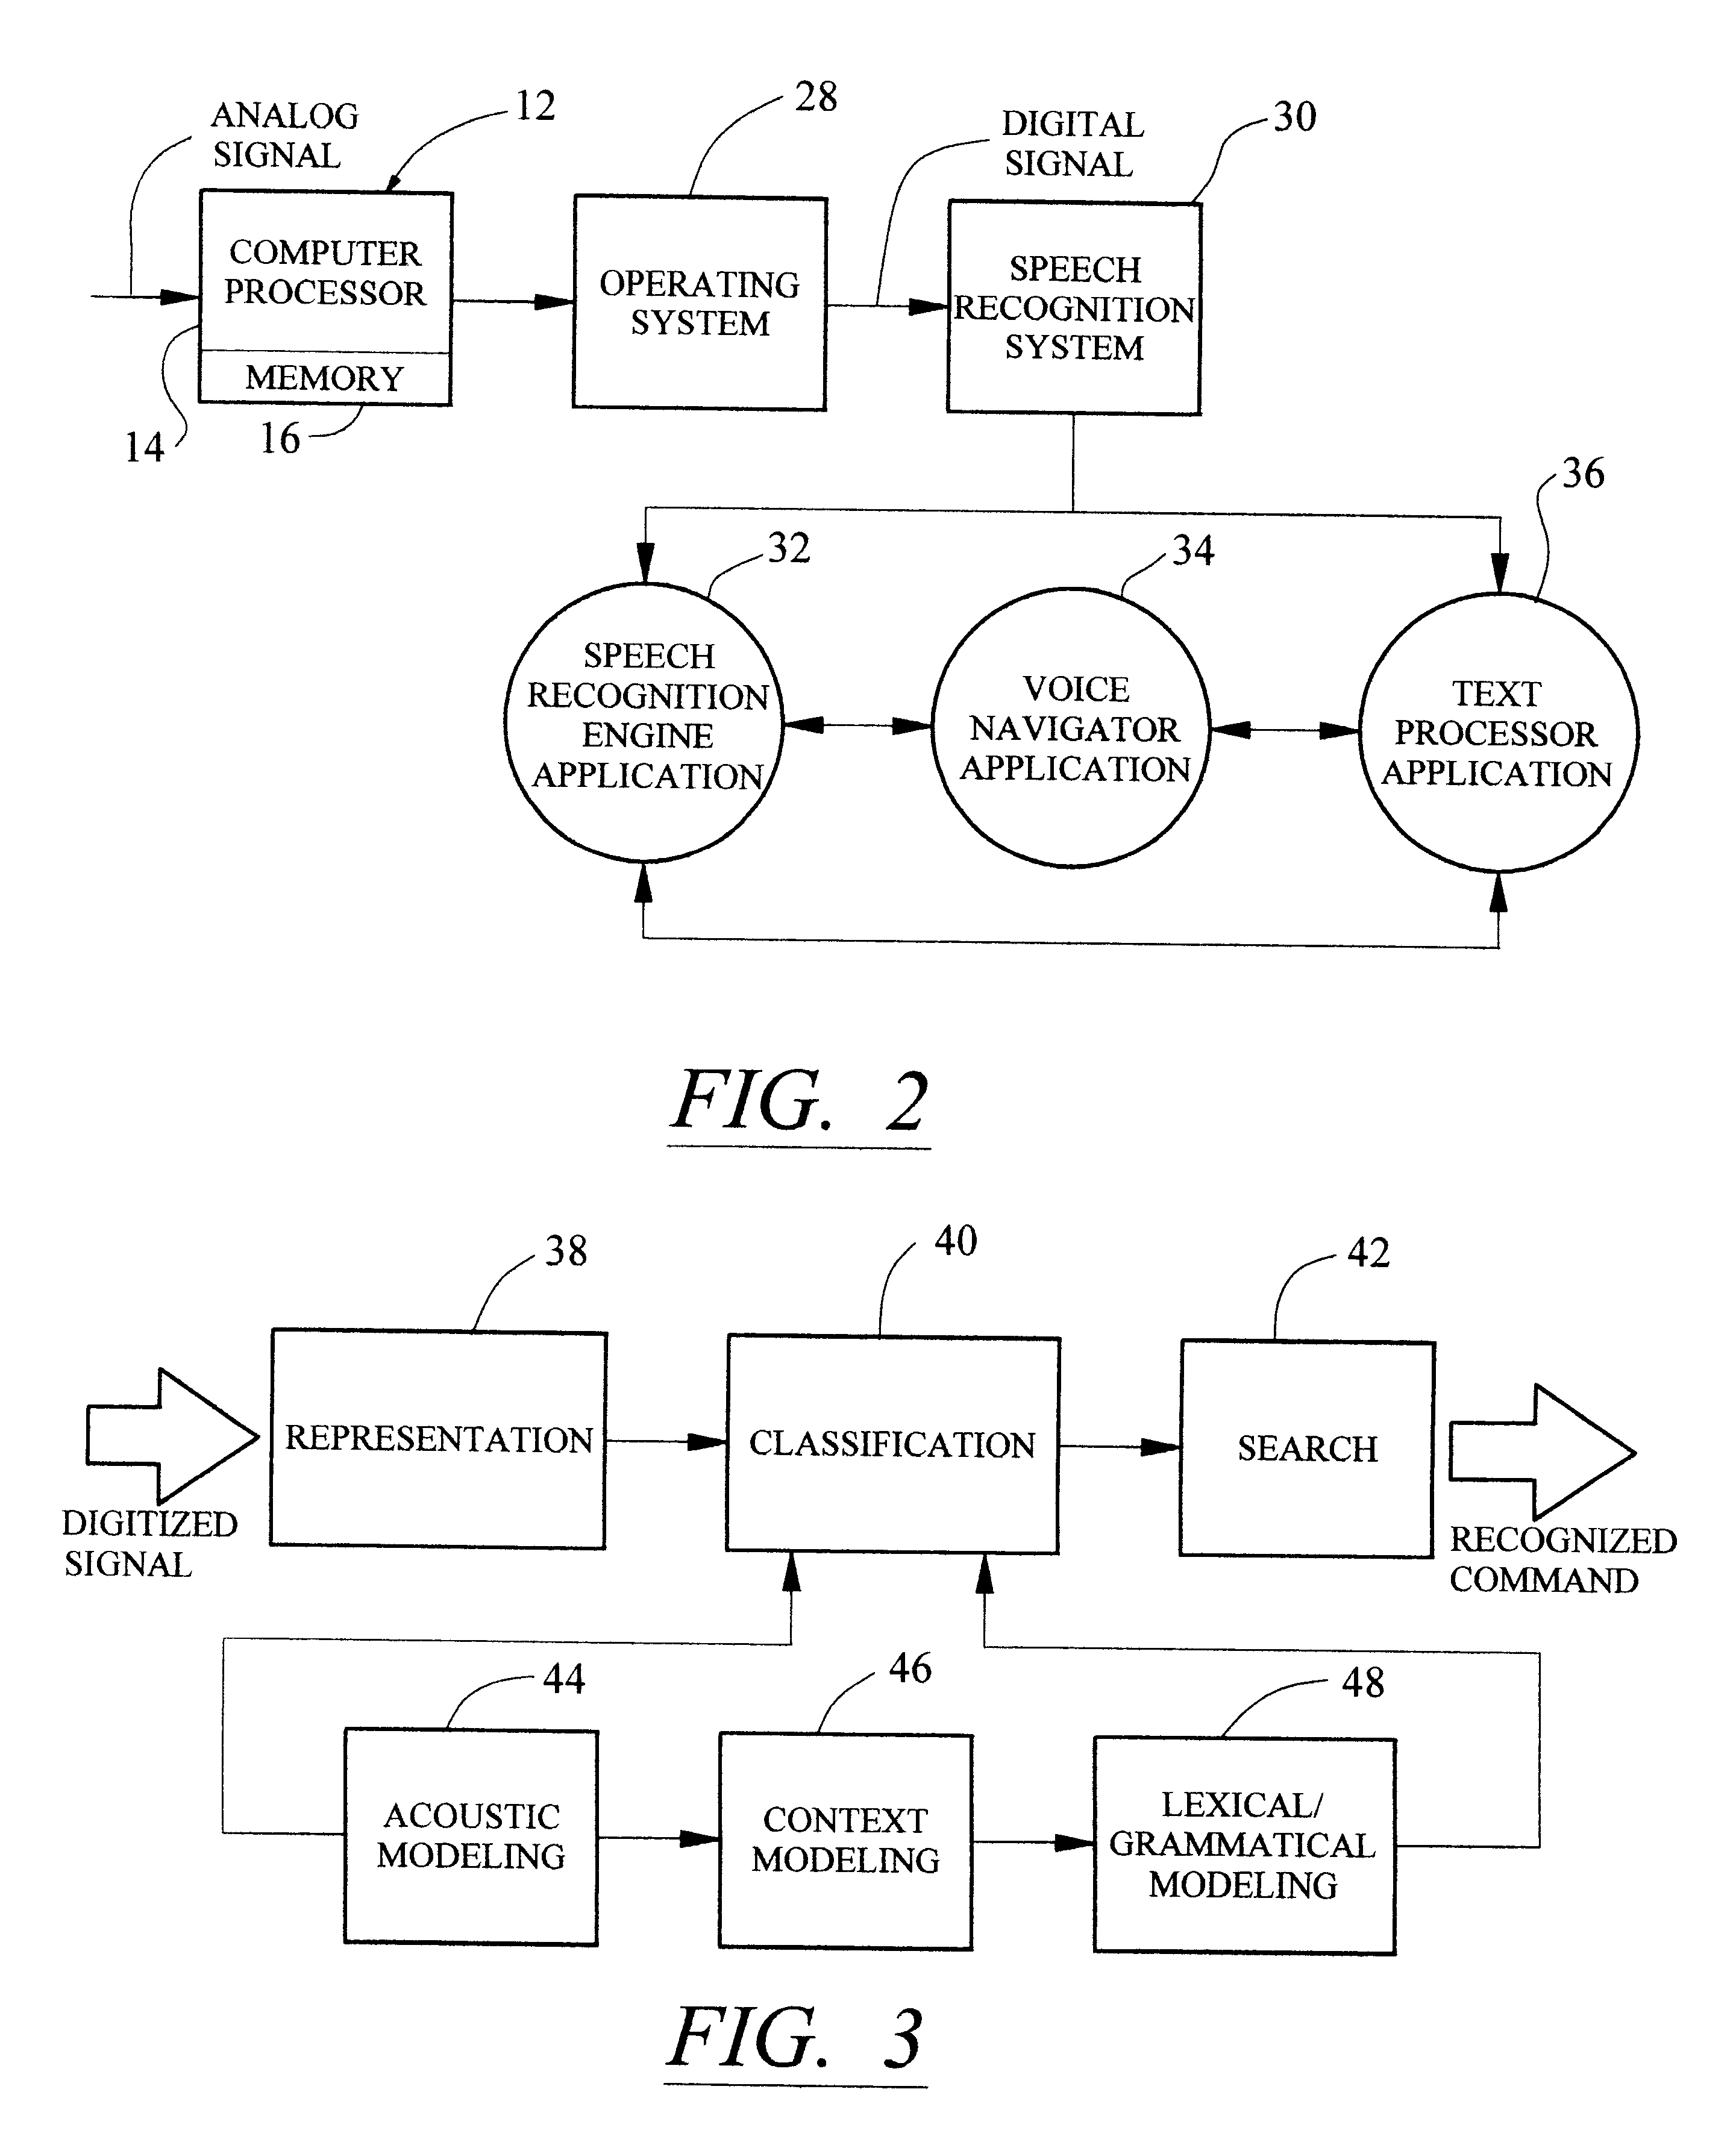 Method and apparatus for providing an event-based "What-Can-I-Say?" window